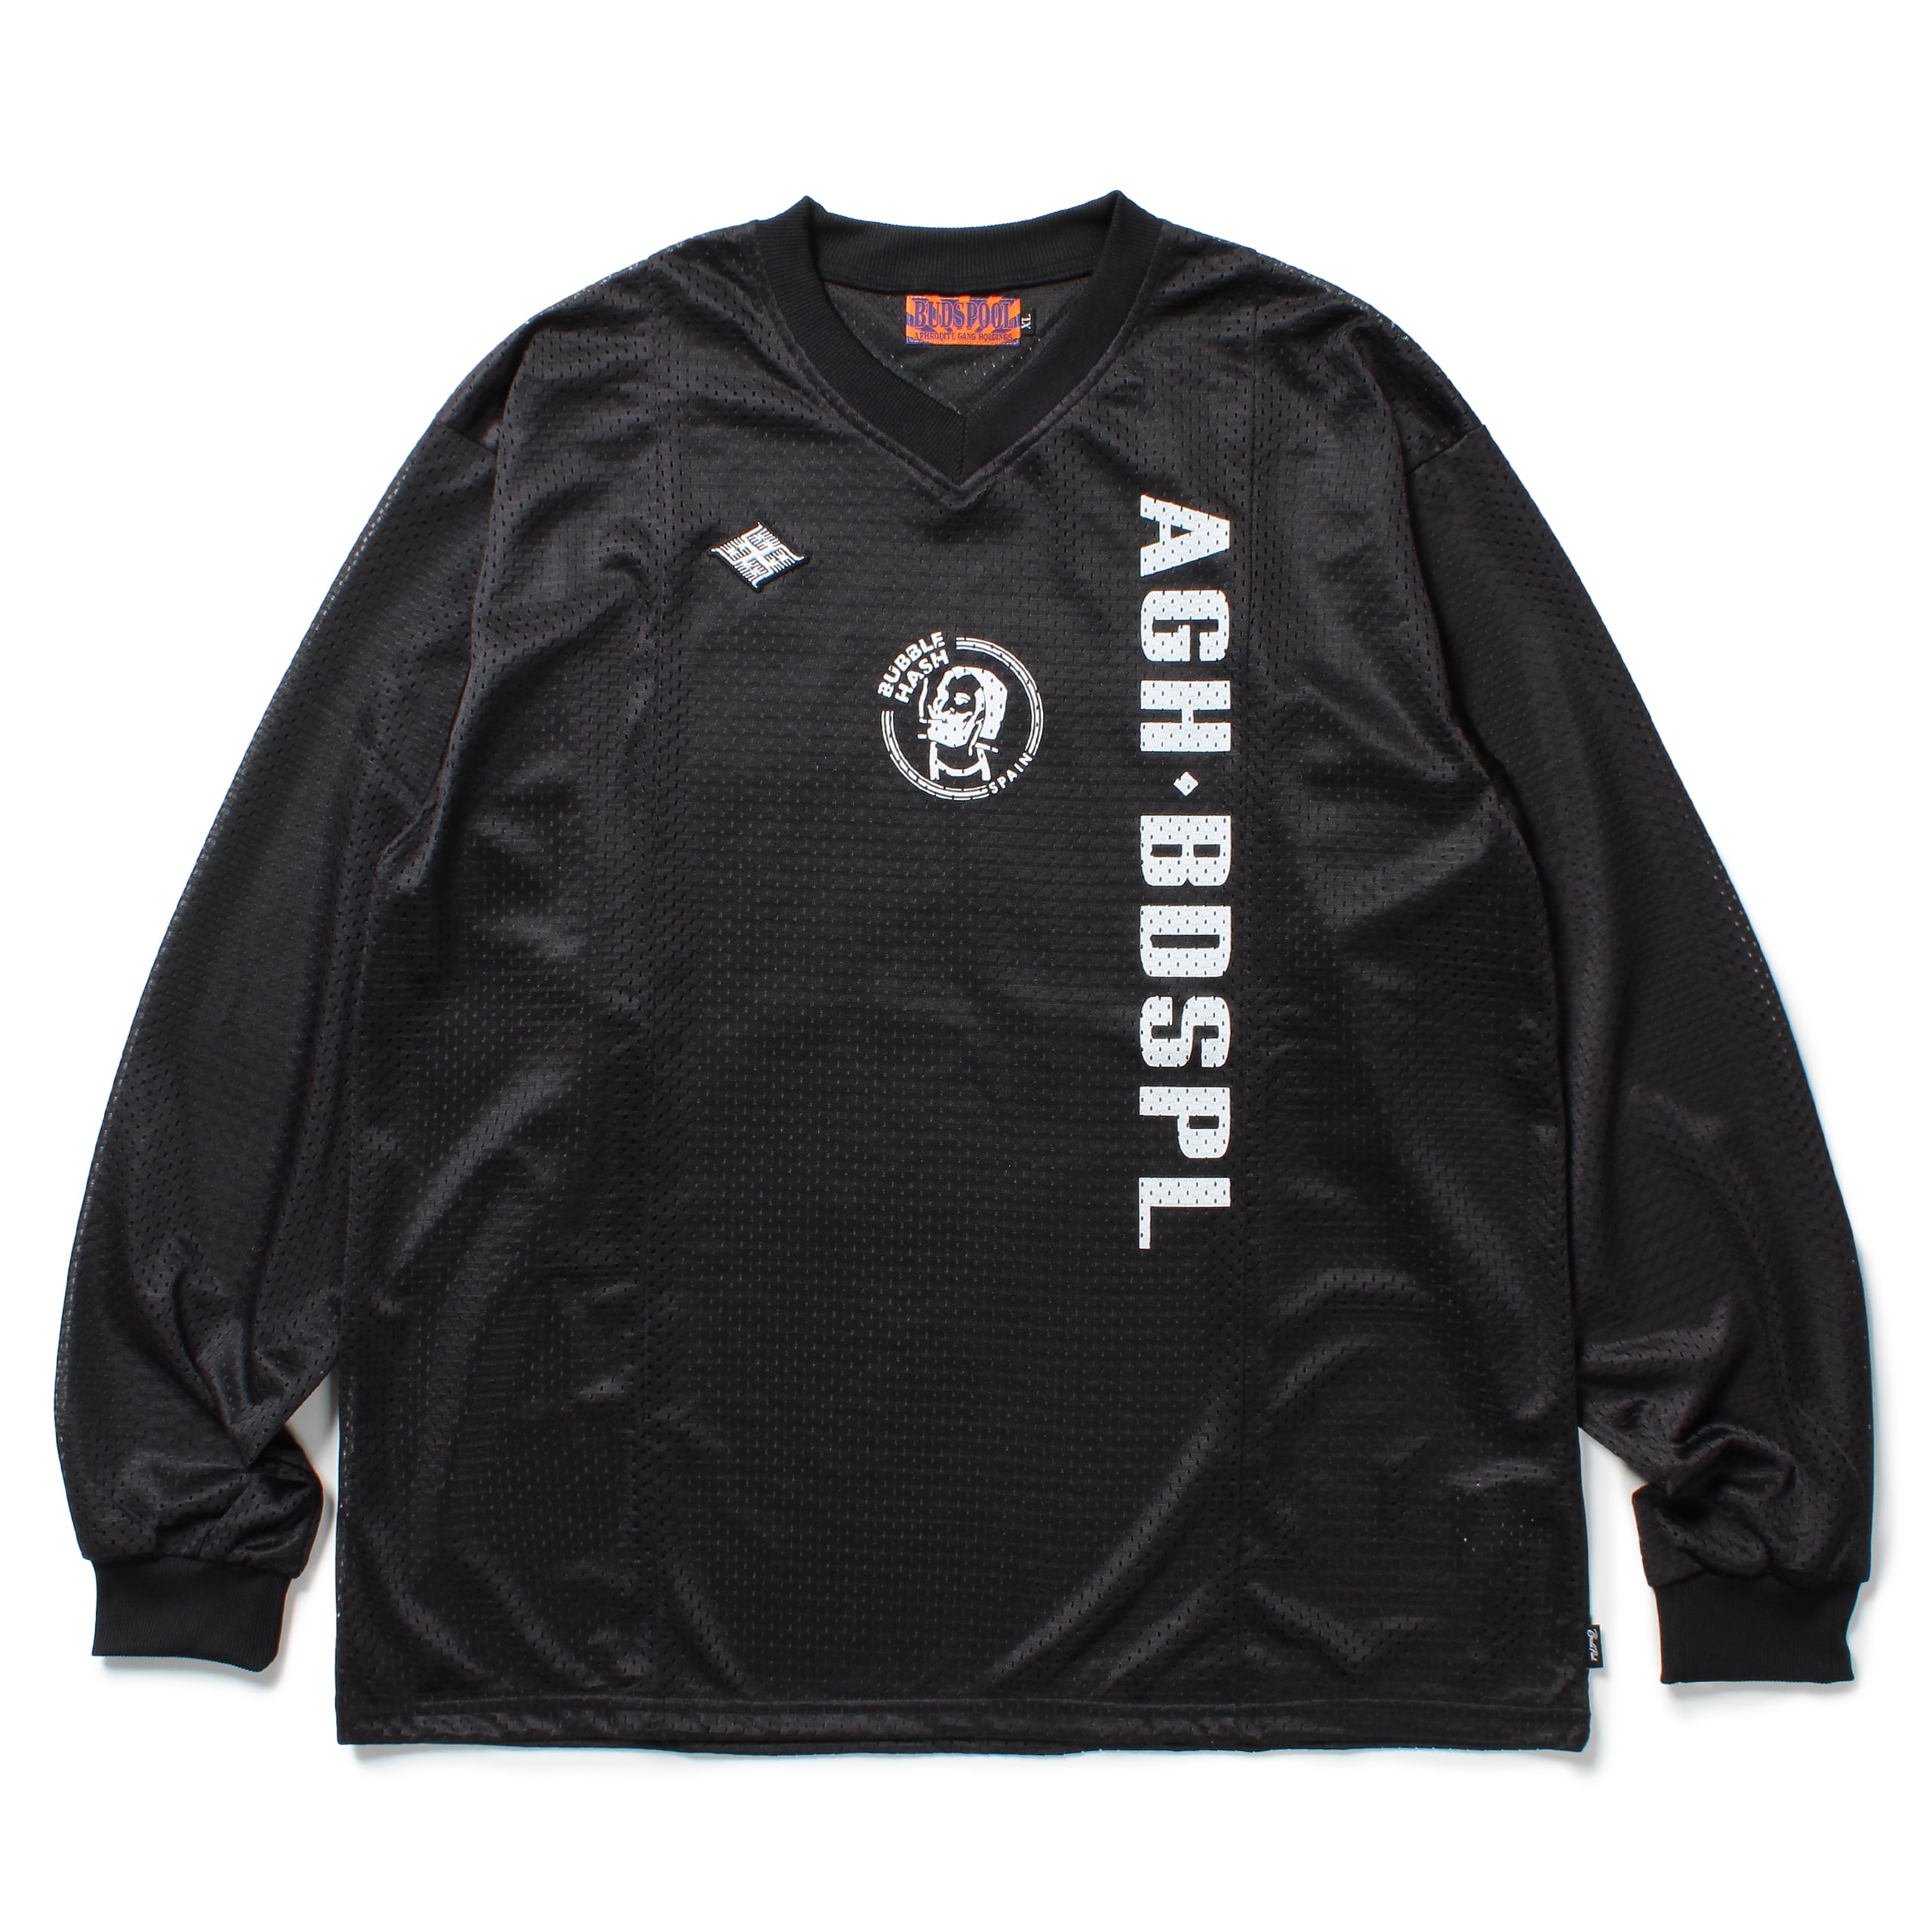 DOUBLE MESH L/S SOCCER JERSEY